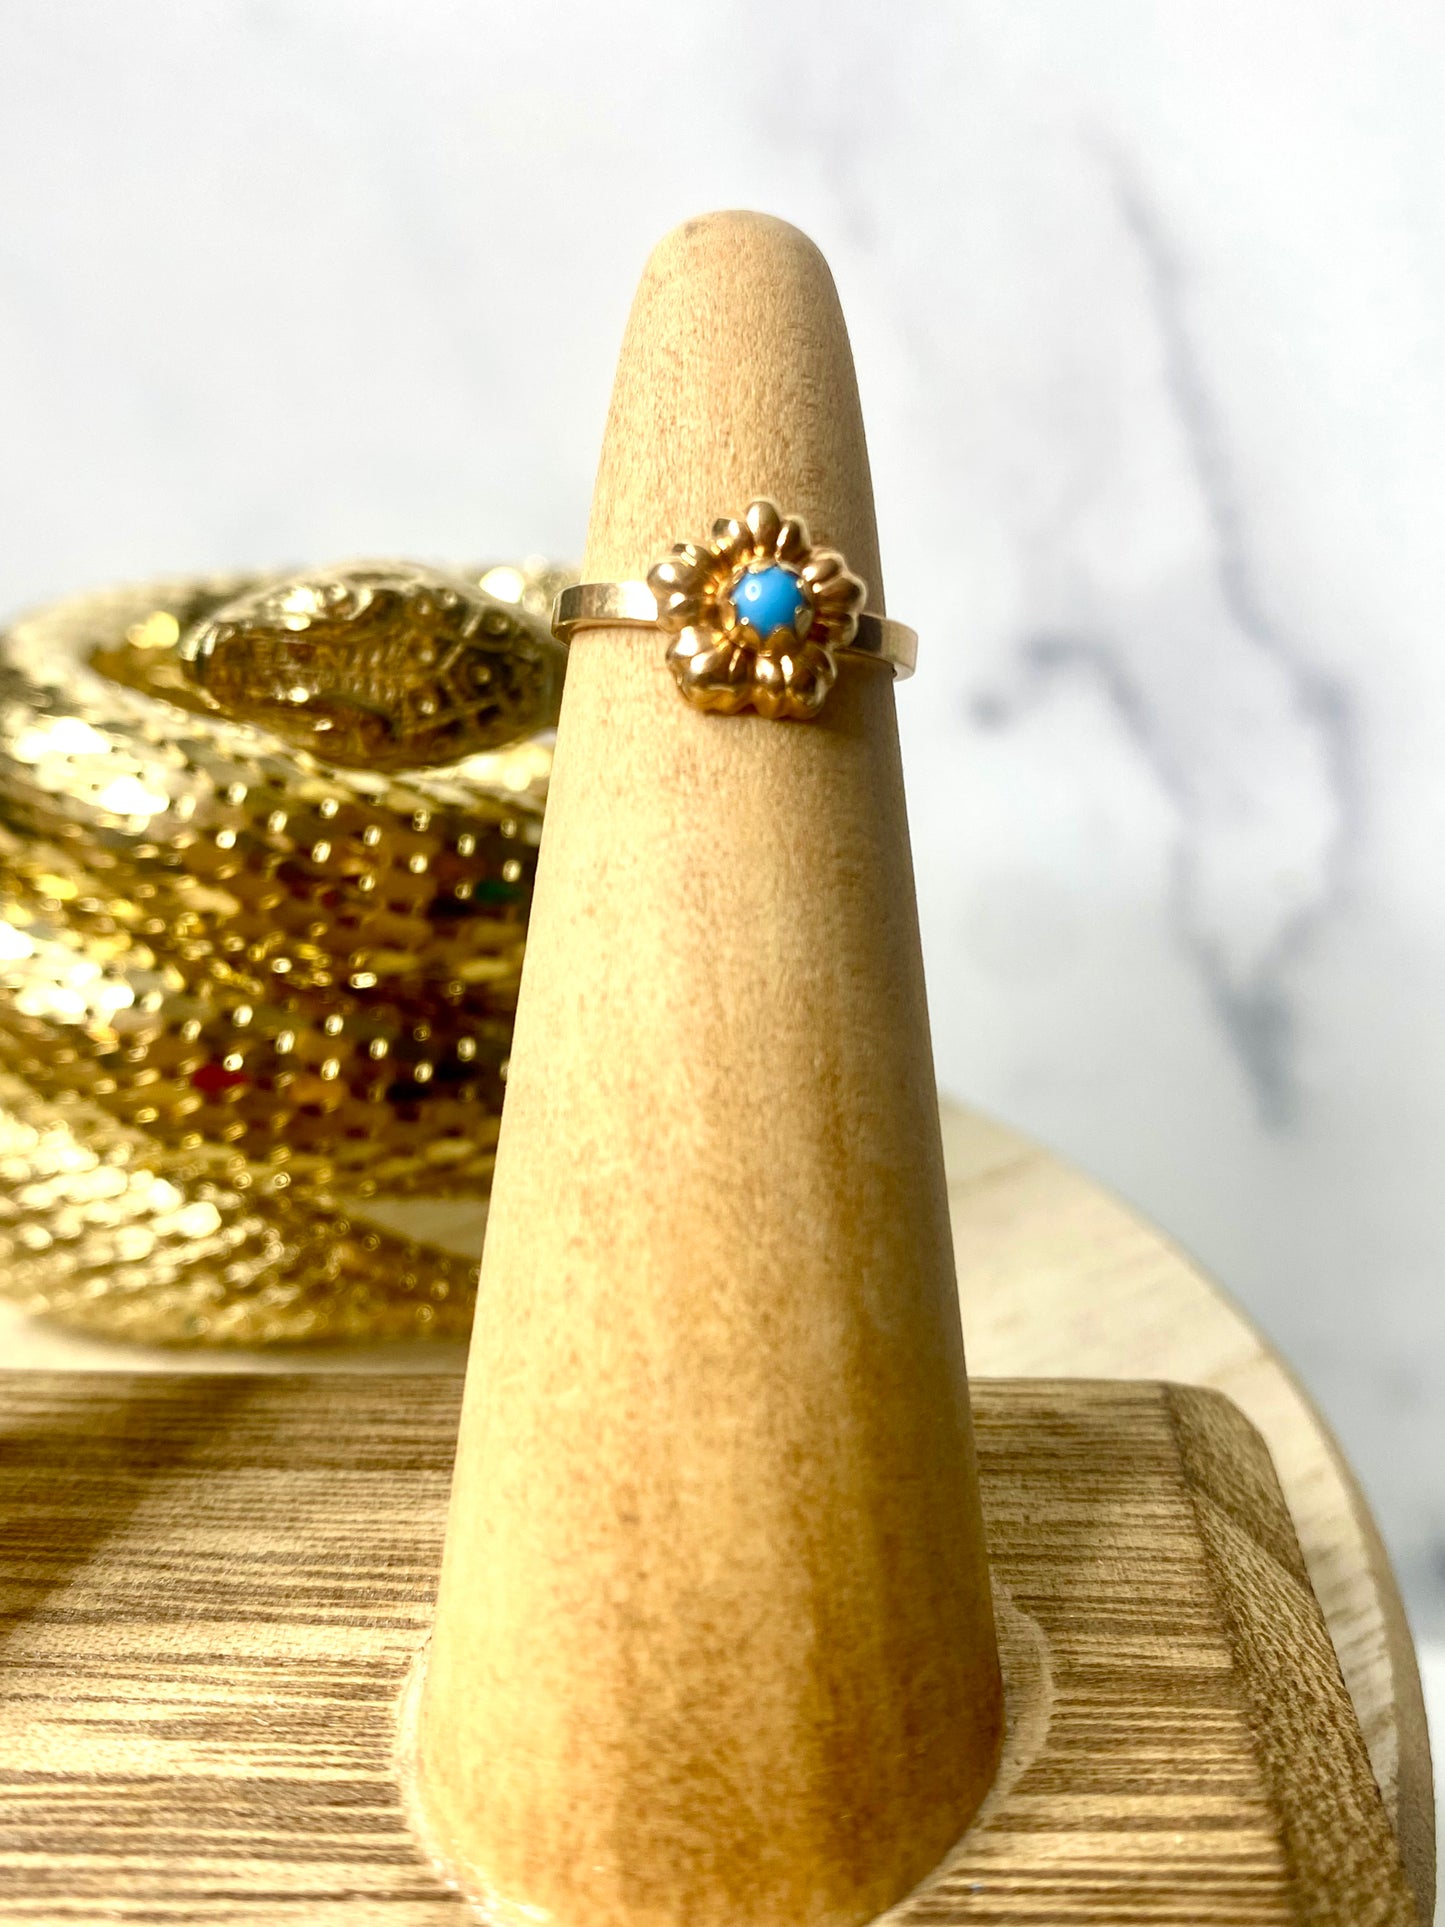 VINTAGE 18K Yellow Gold Ring Micro Turquoise Stone Ring Size 3 US (baby/child)